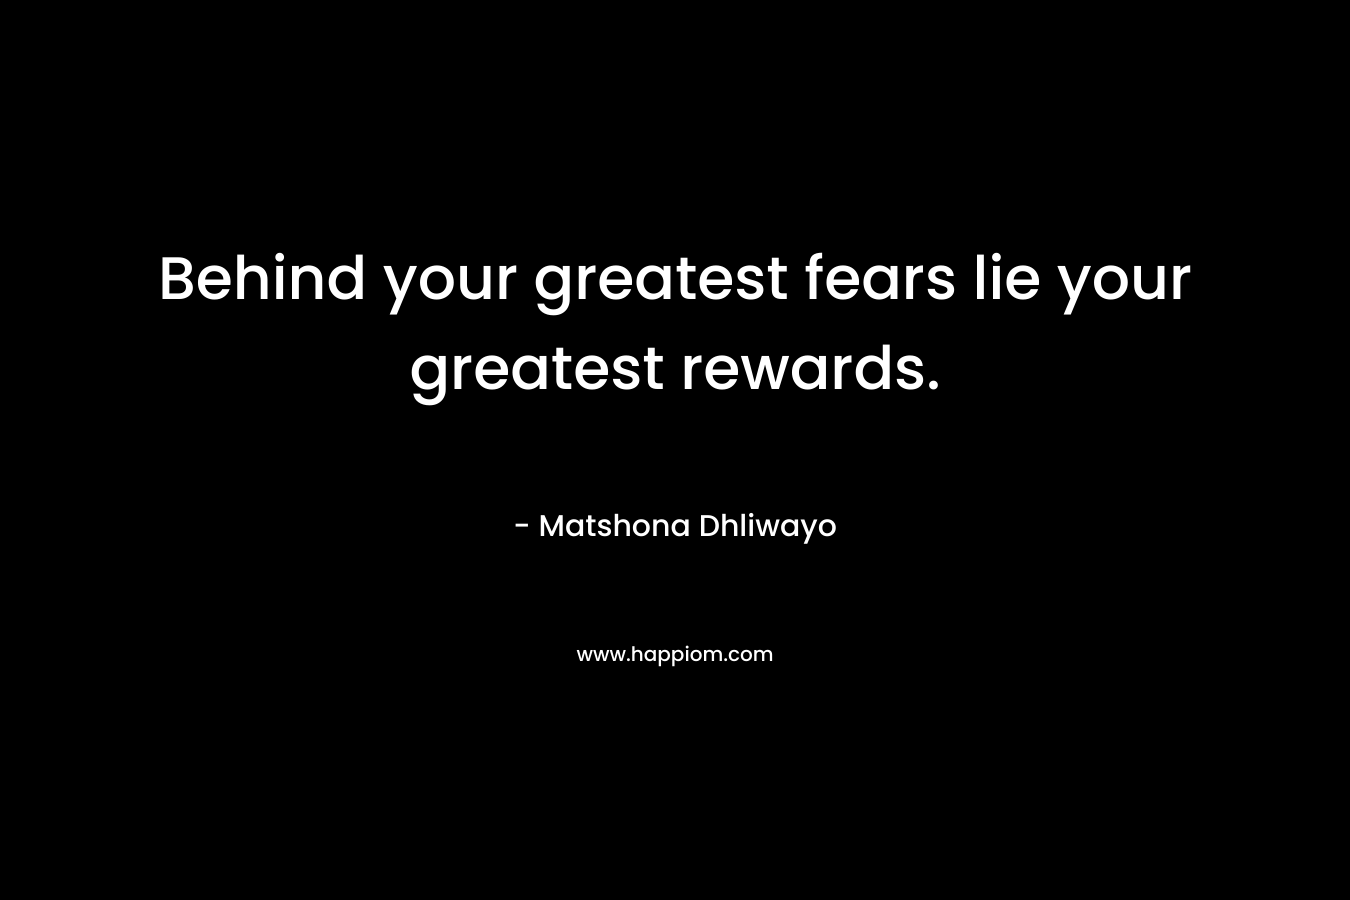 Behind your greatest fears lie your greatest rewards.